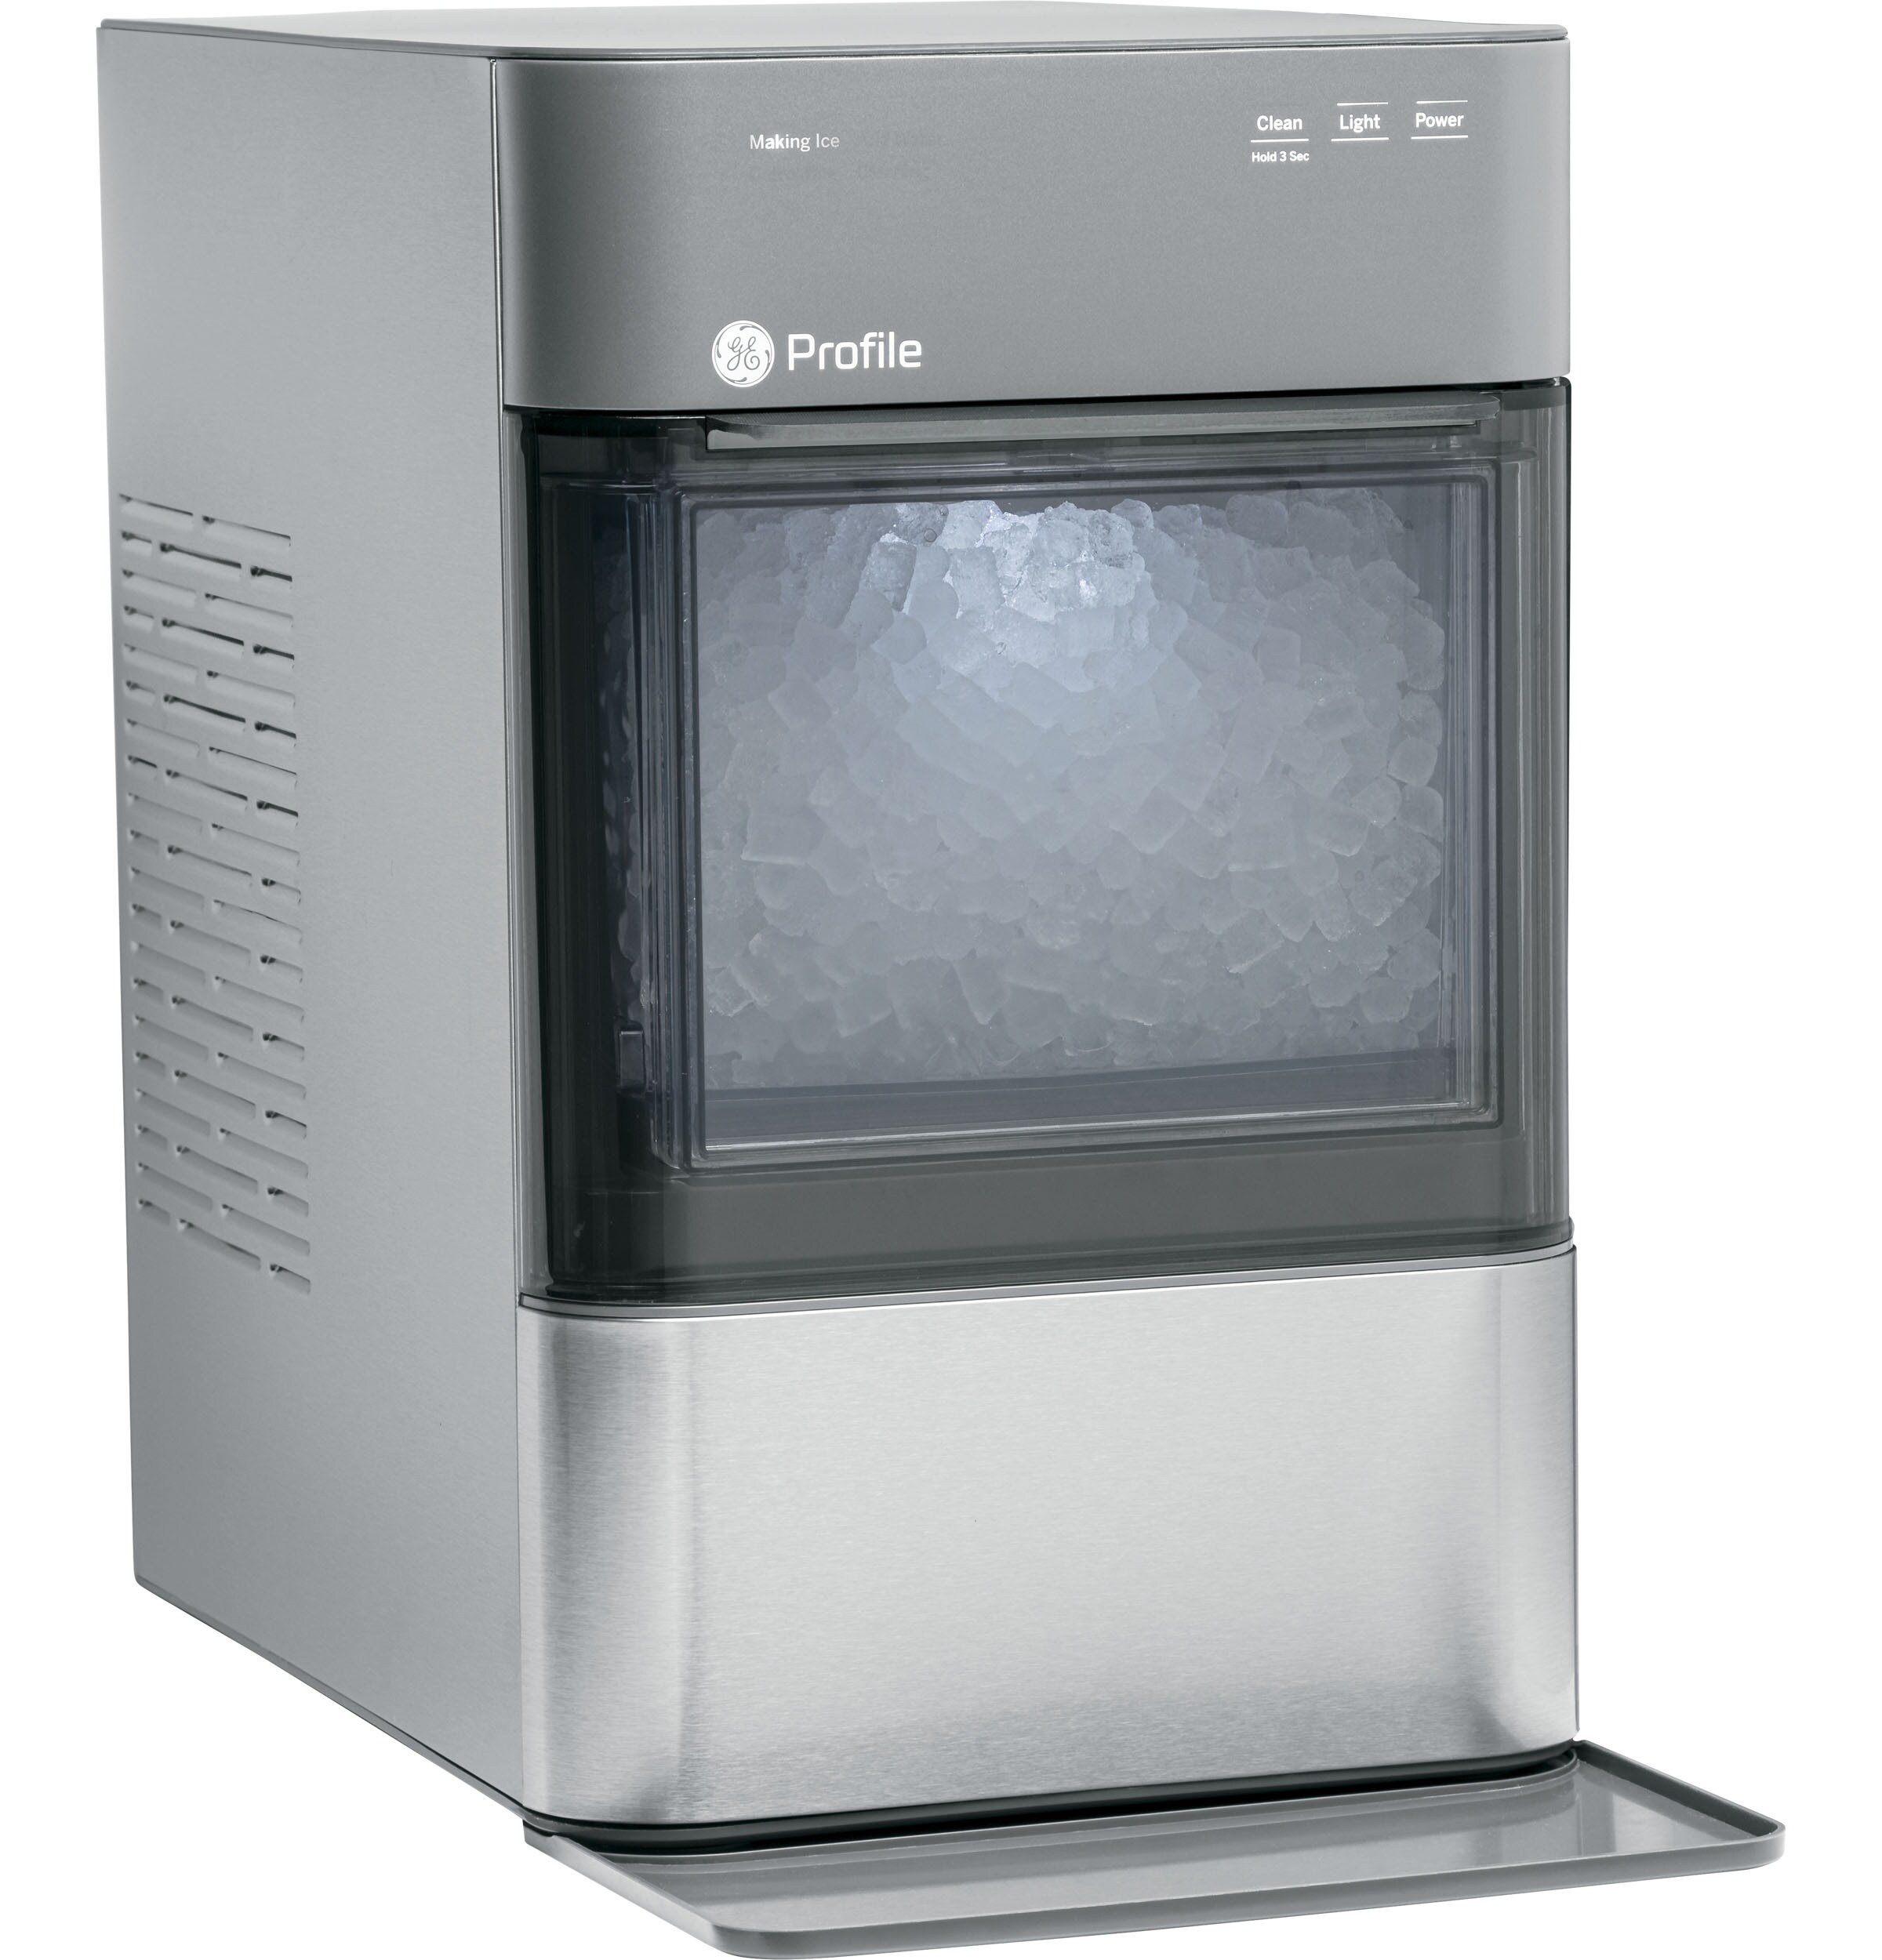 GE Profile Opal Countertop Nugget Ice Maker Review - The Stripe